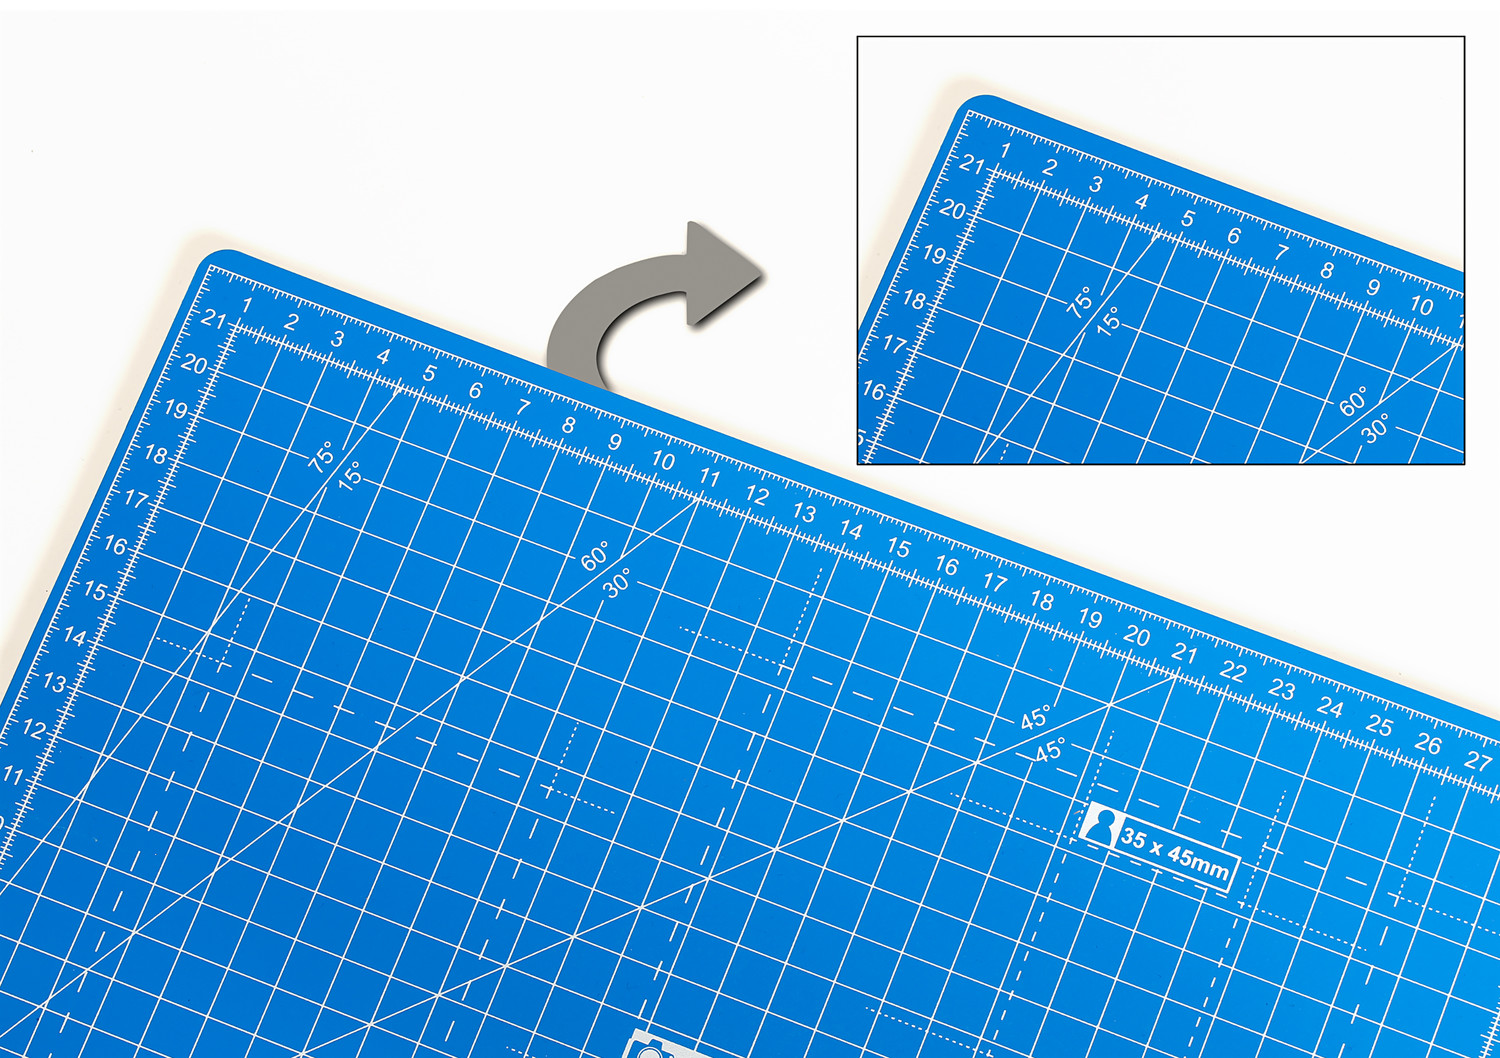 The cutting mat is printed on both front and reverse so you can use either side, extending its service life.